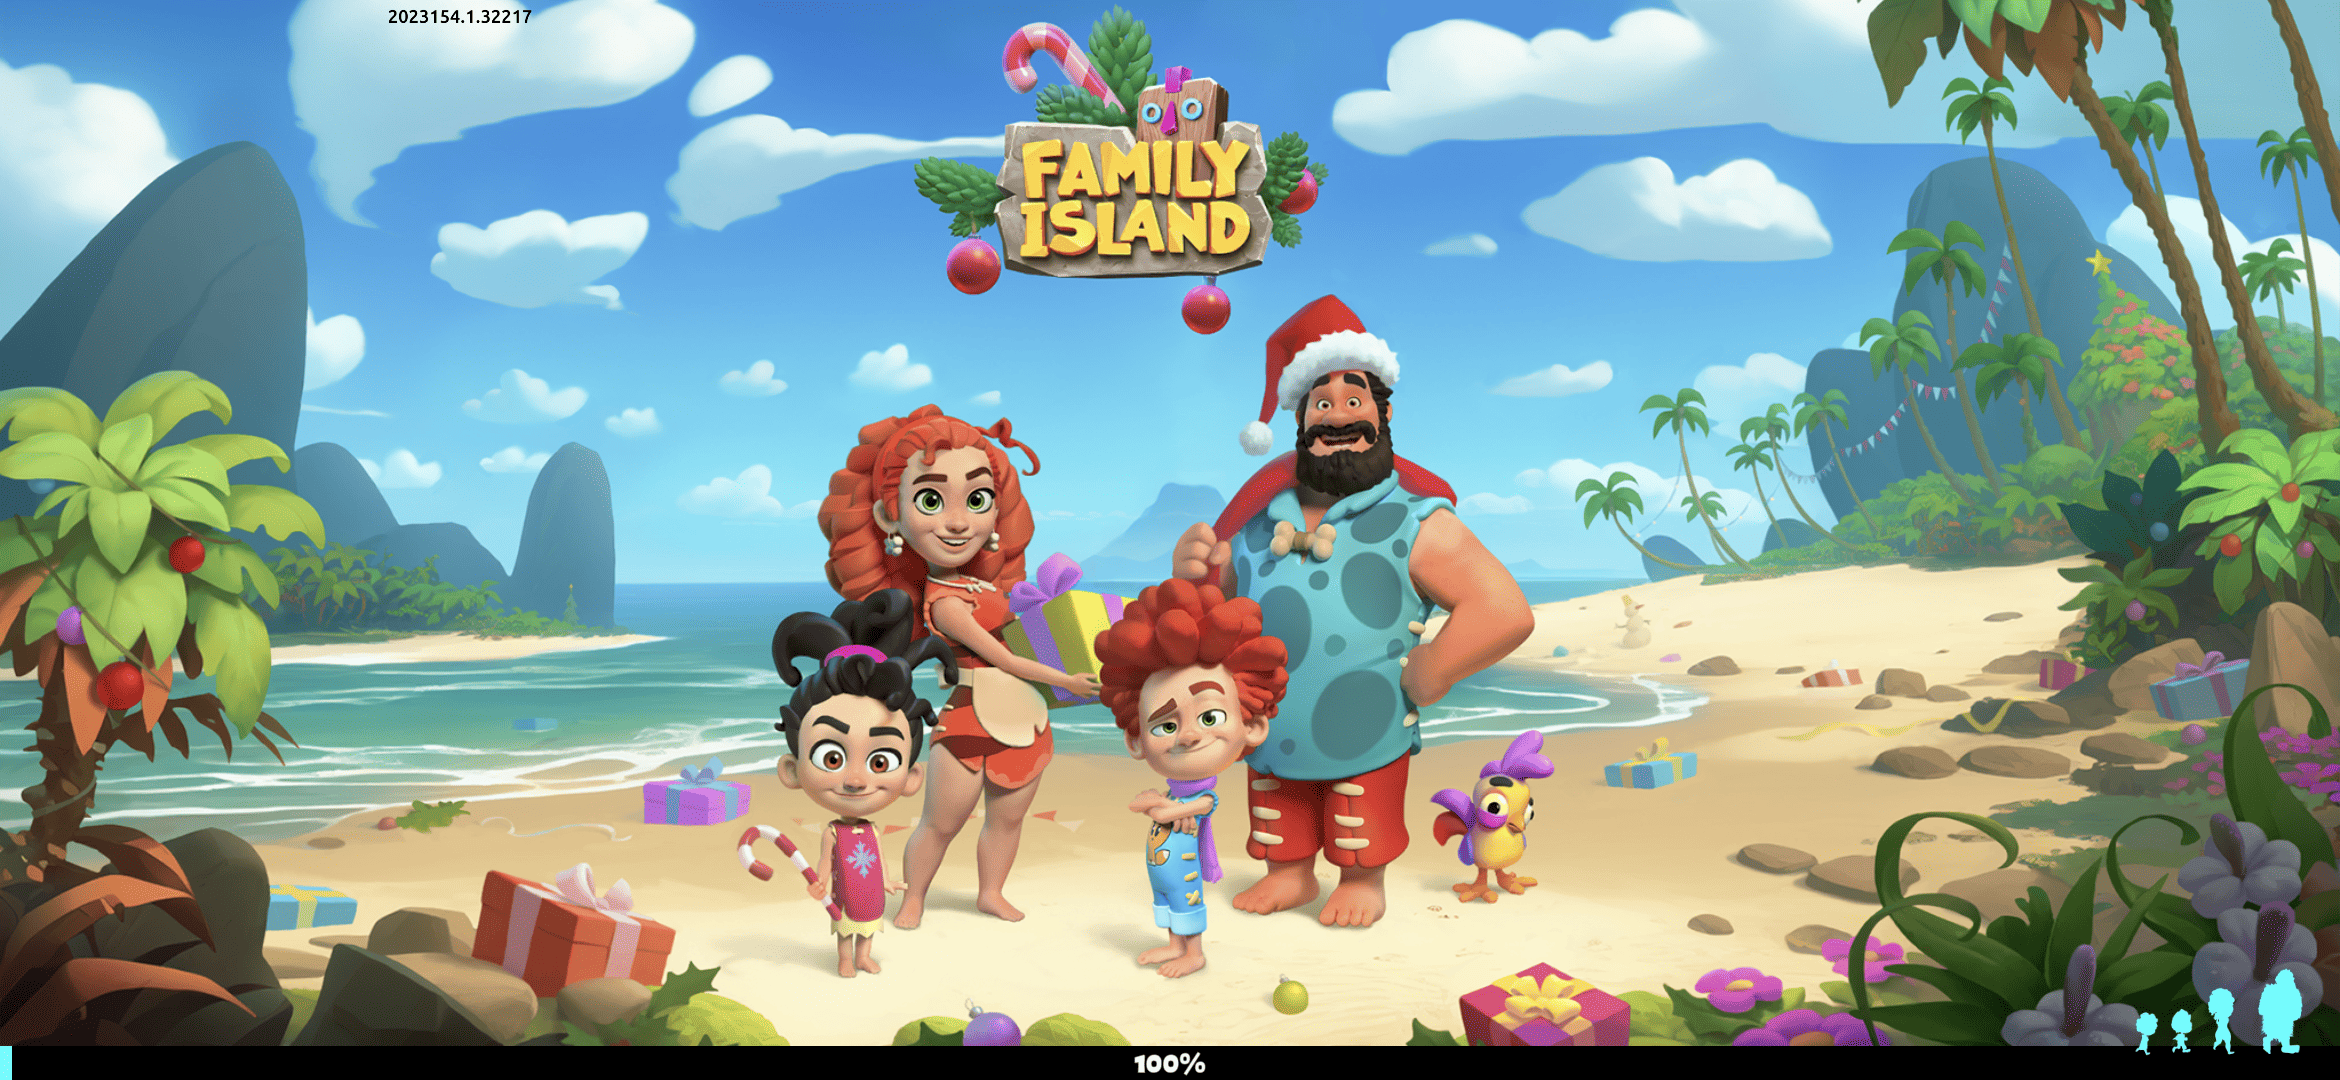 Family Island Cheats & Cheat Codes for Mobile Cheat Code Central